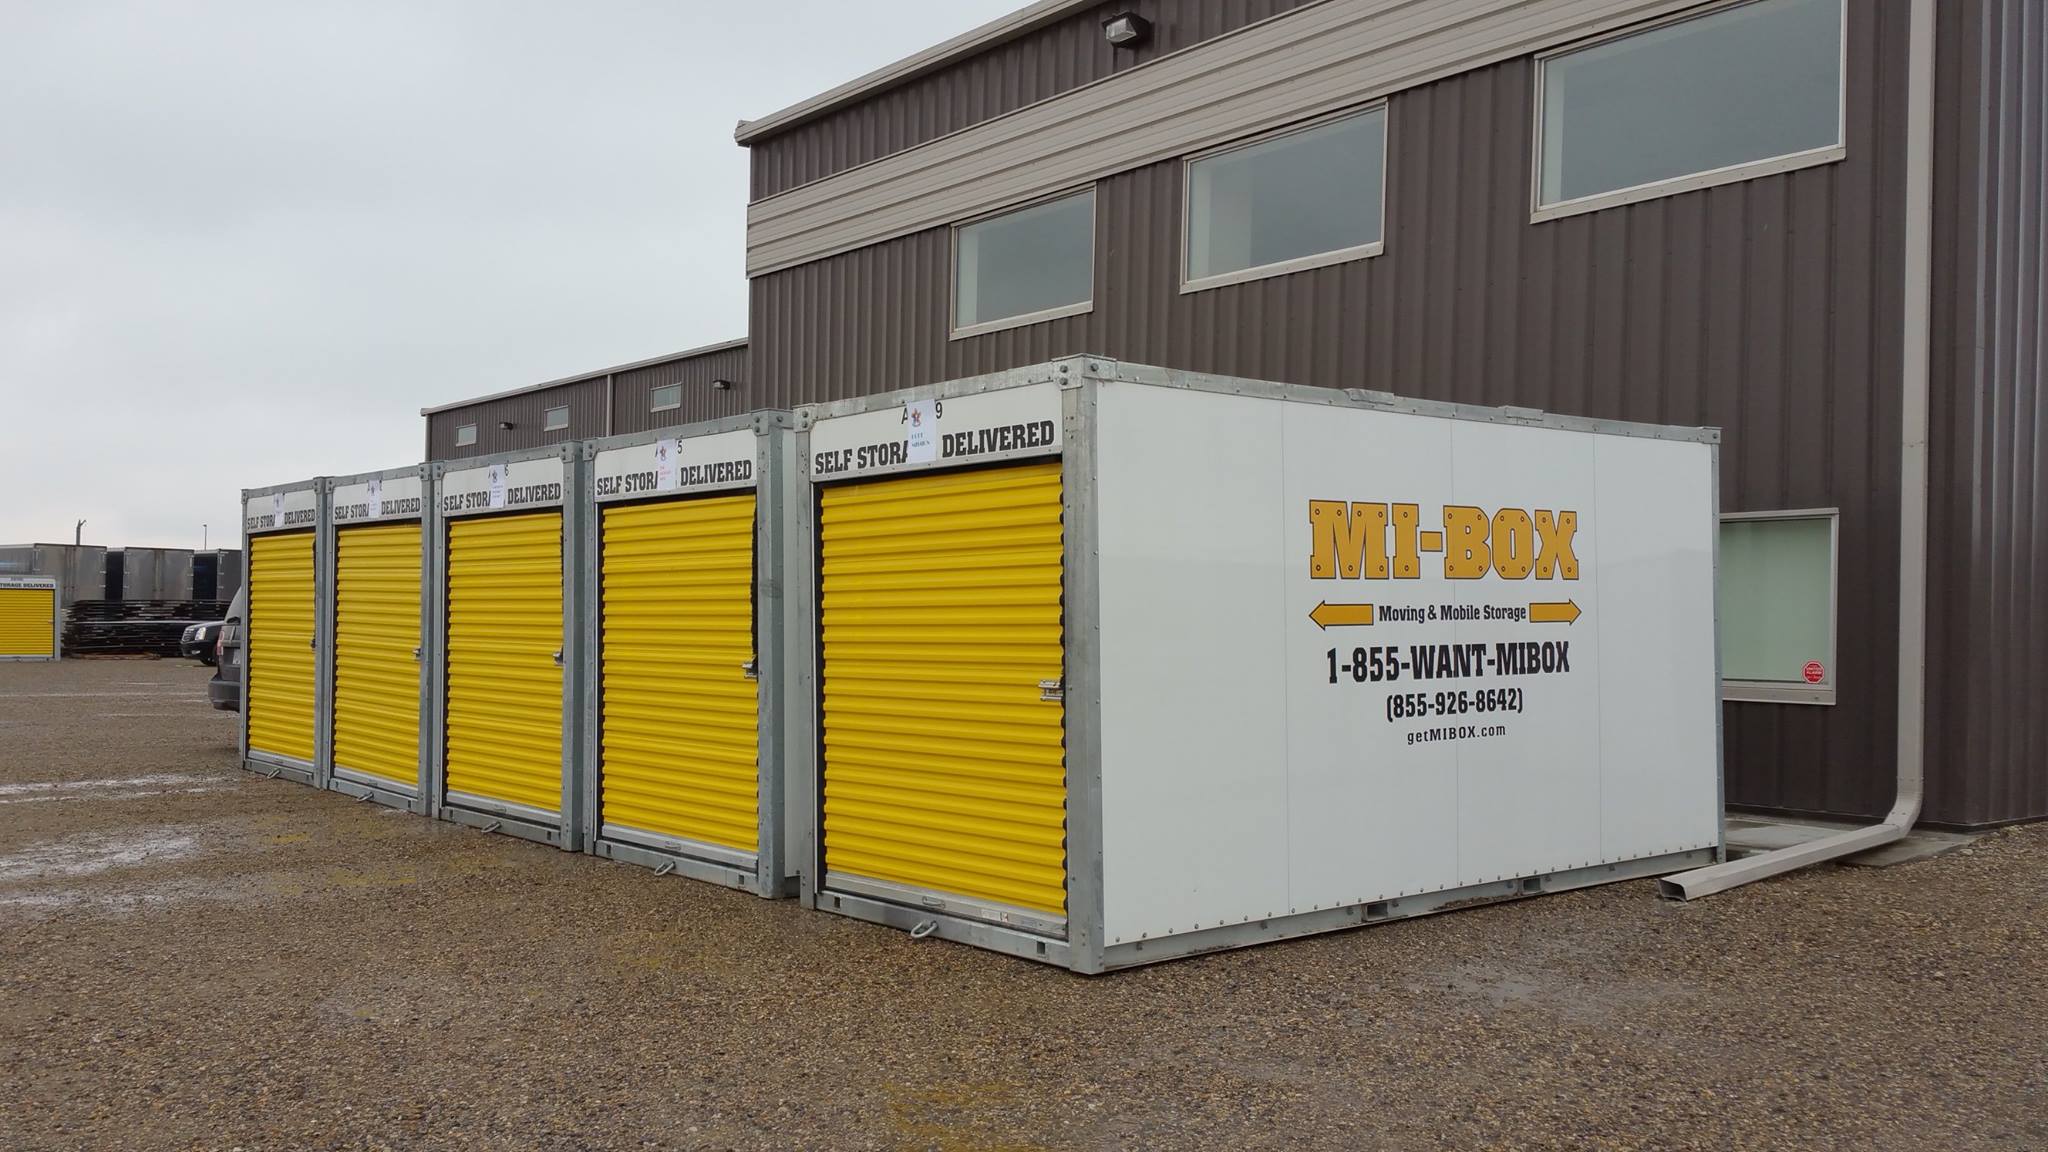 Rent Portable Storage Containers In Calgary - No Rust No Leaks | MI-BOX